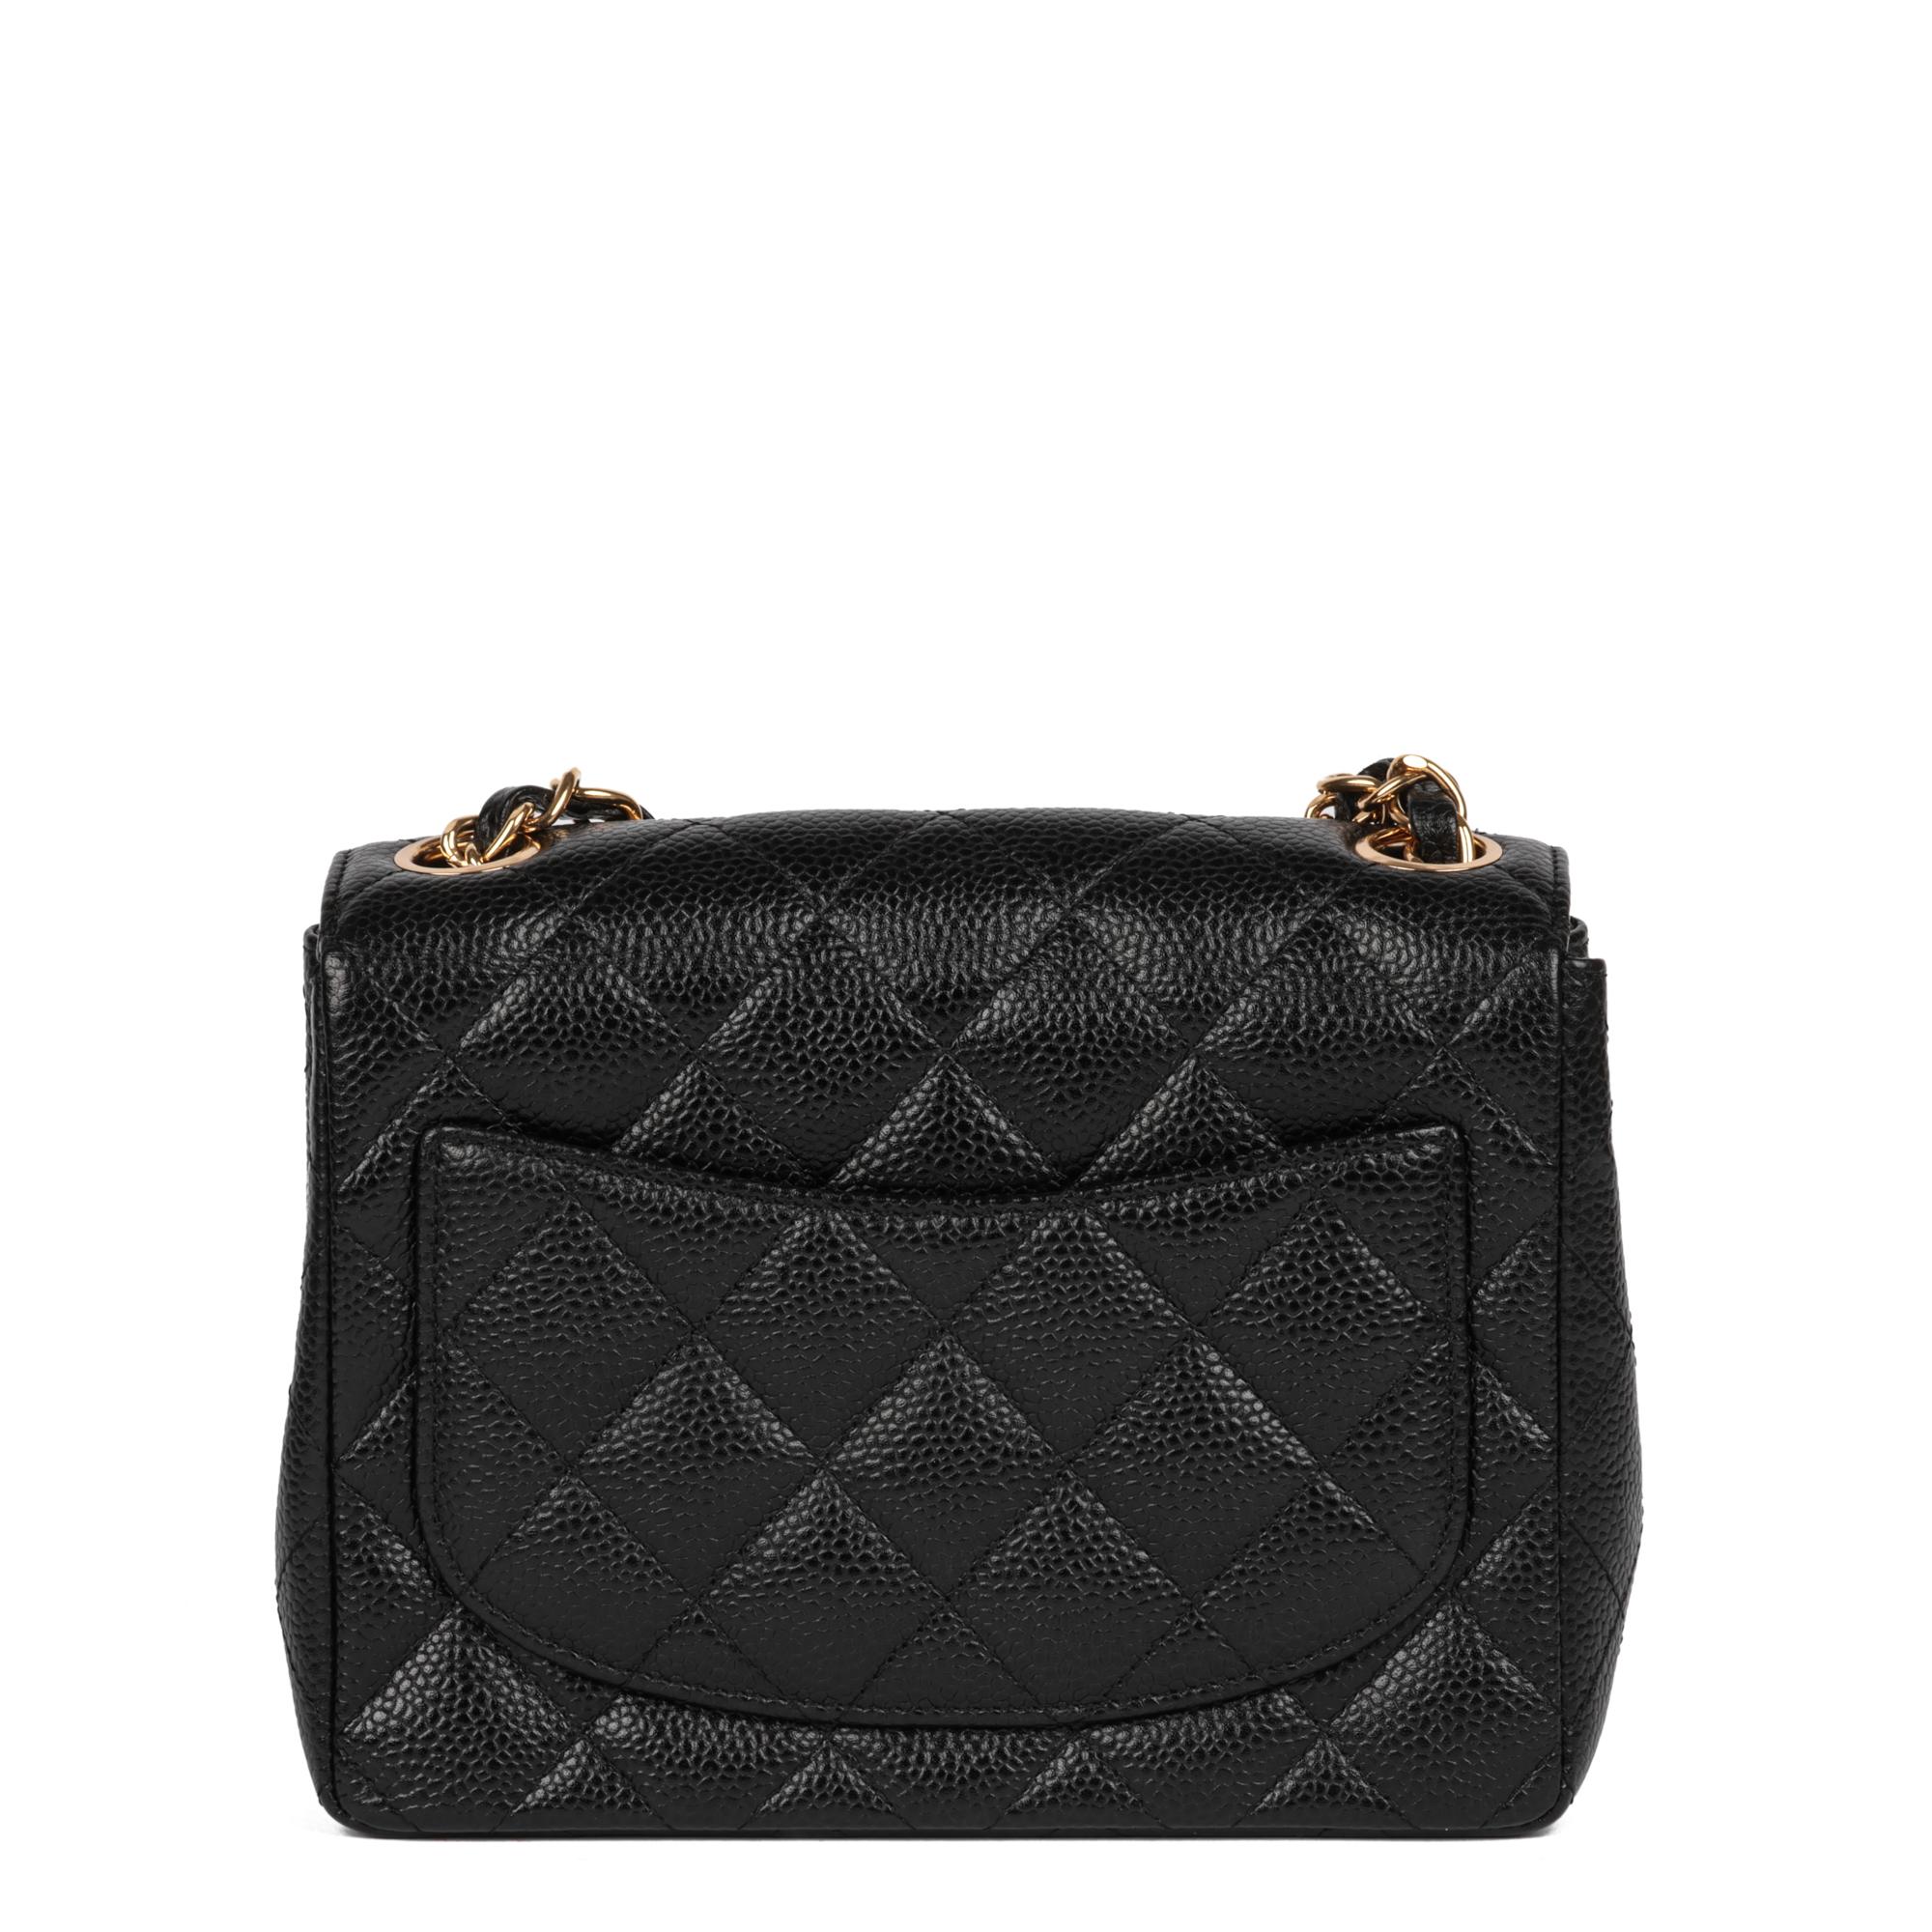 CHANEL Black Quilted Caviar Leather Vintage Square Mini Flap Bag 1